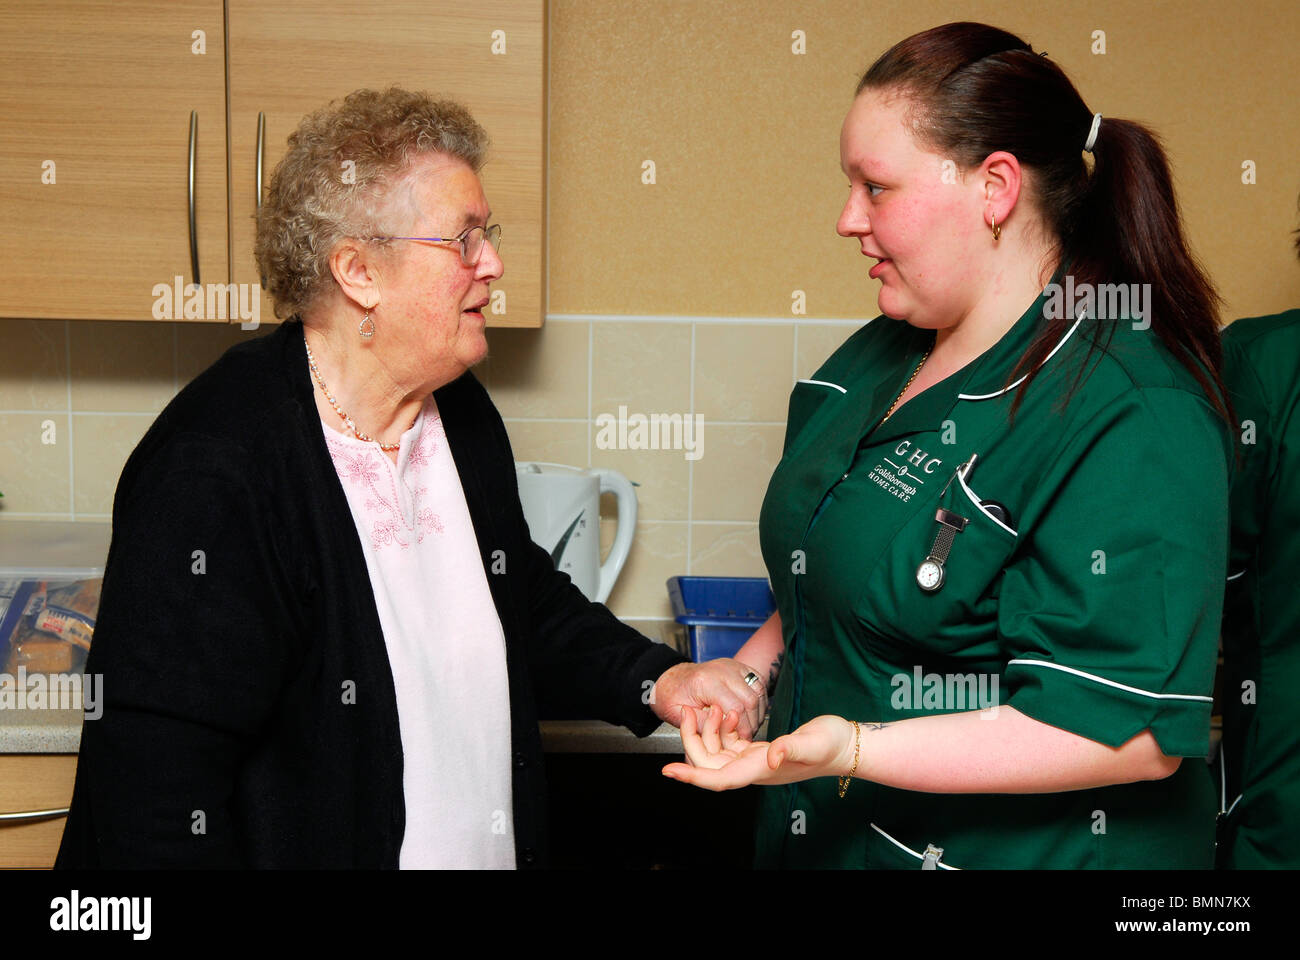 Healthcare worker interacting with elderly resident at an old people's home, Wirral, UK Stock Photo